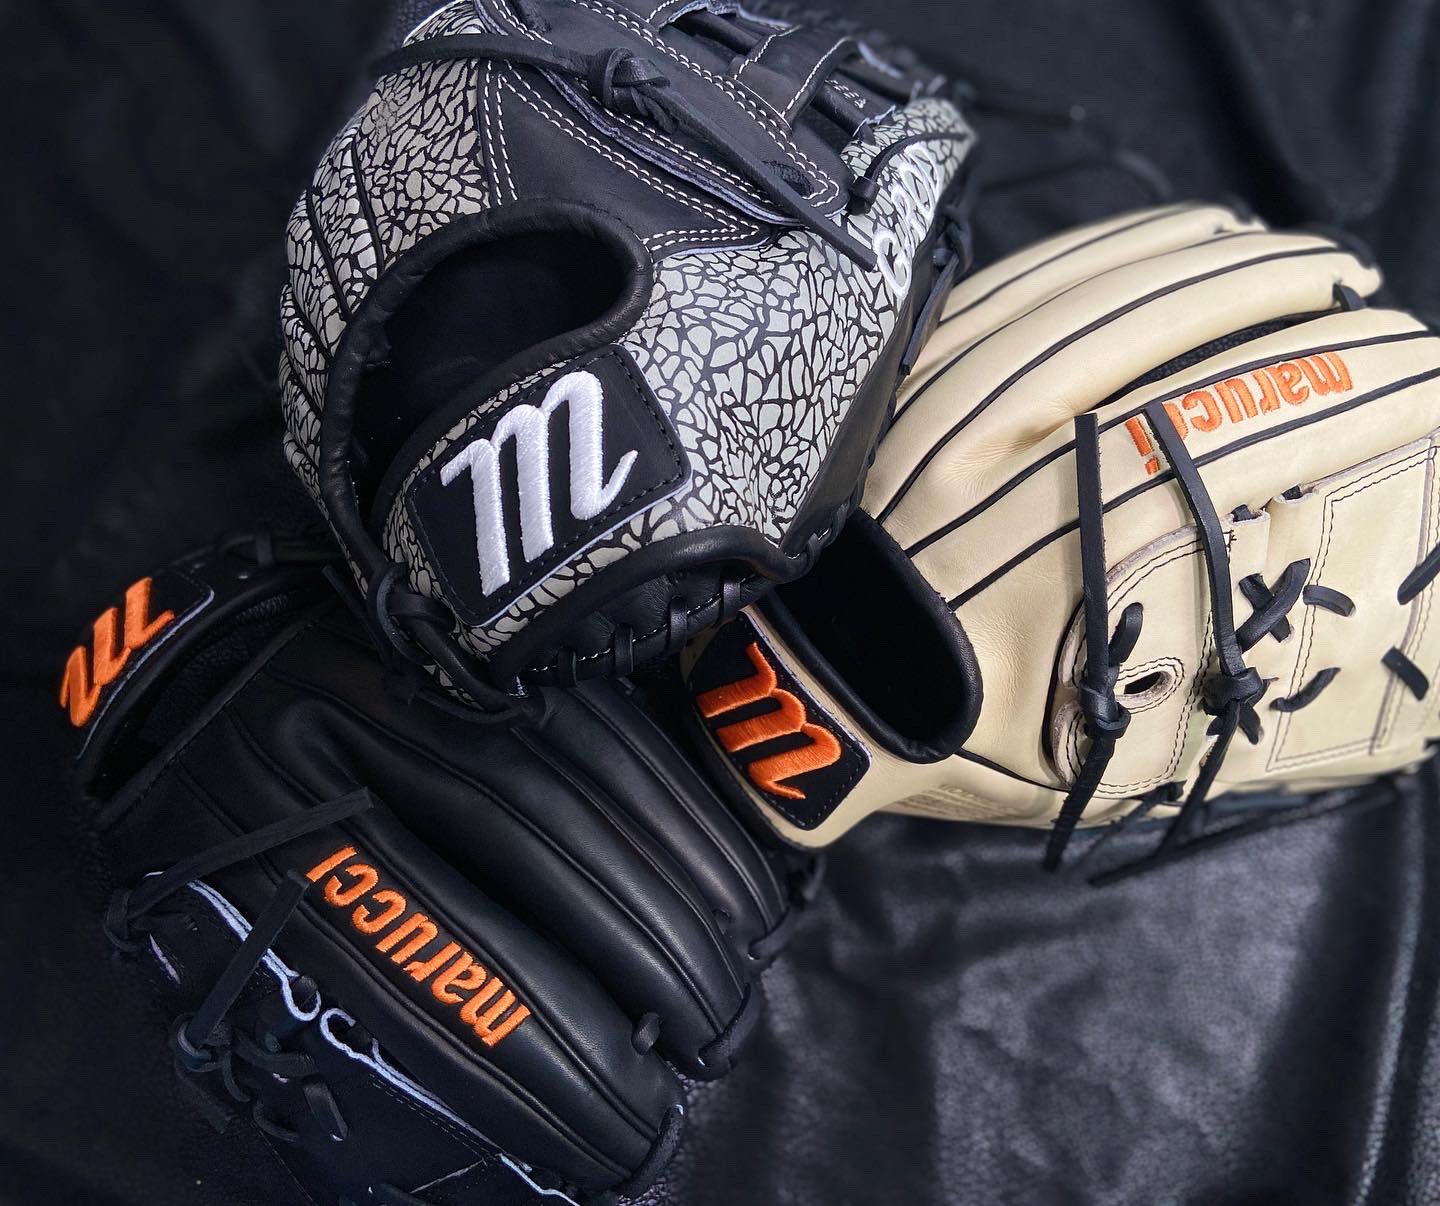 Marucci on X: Proud to have baseball's #1 pitching prospect on